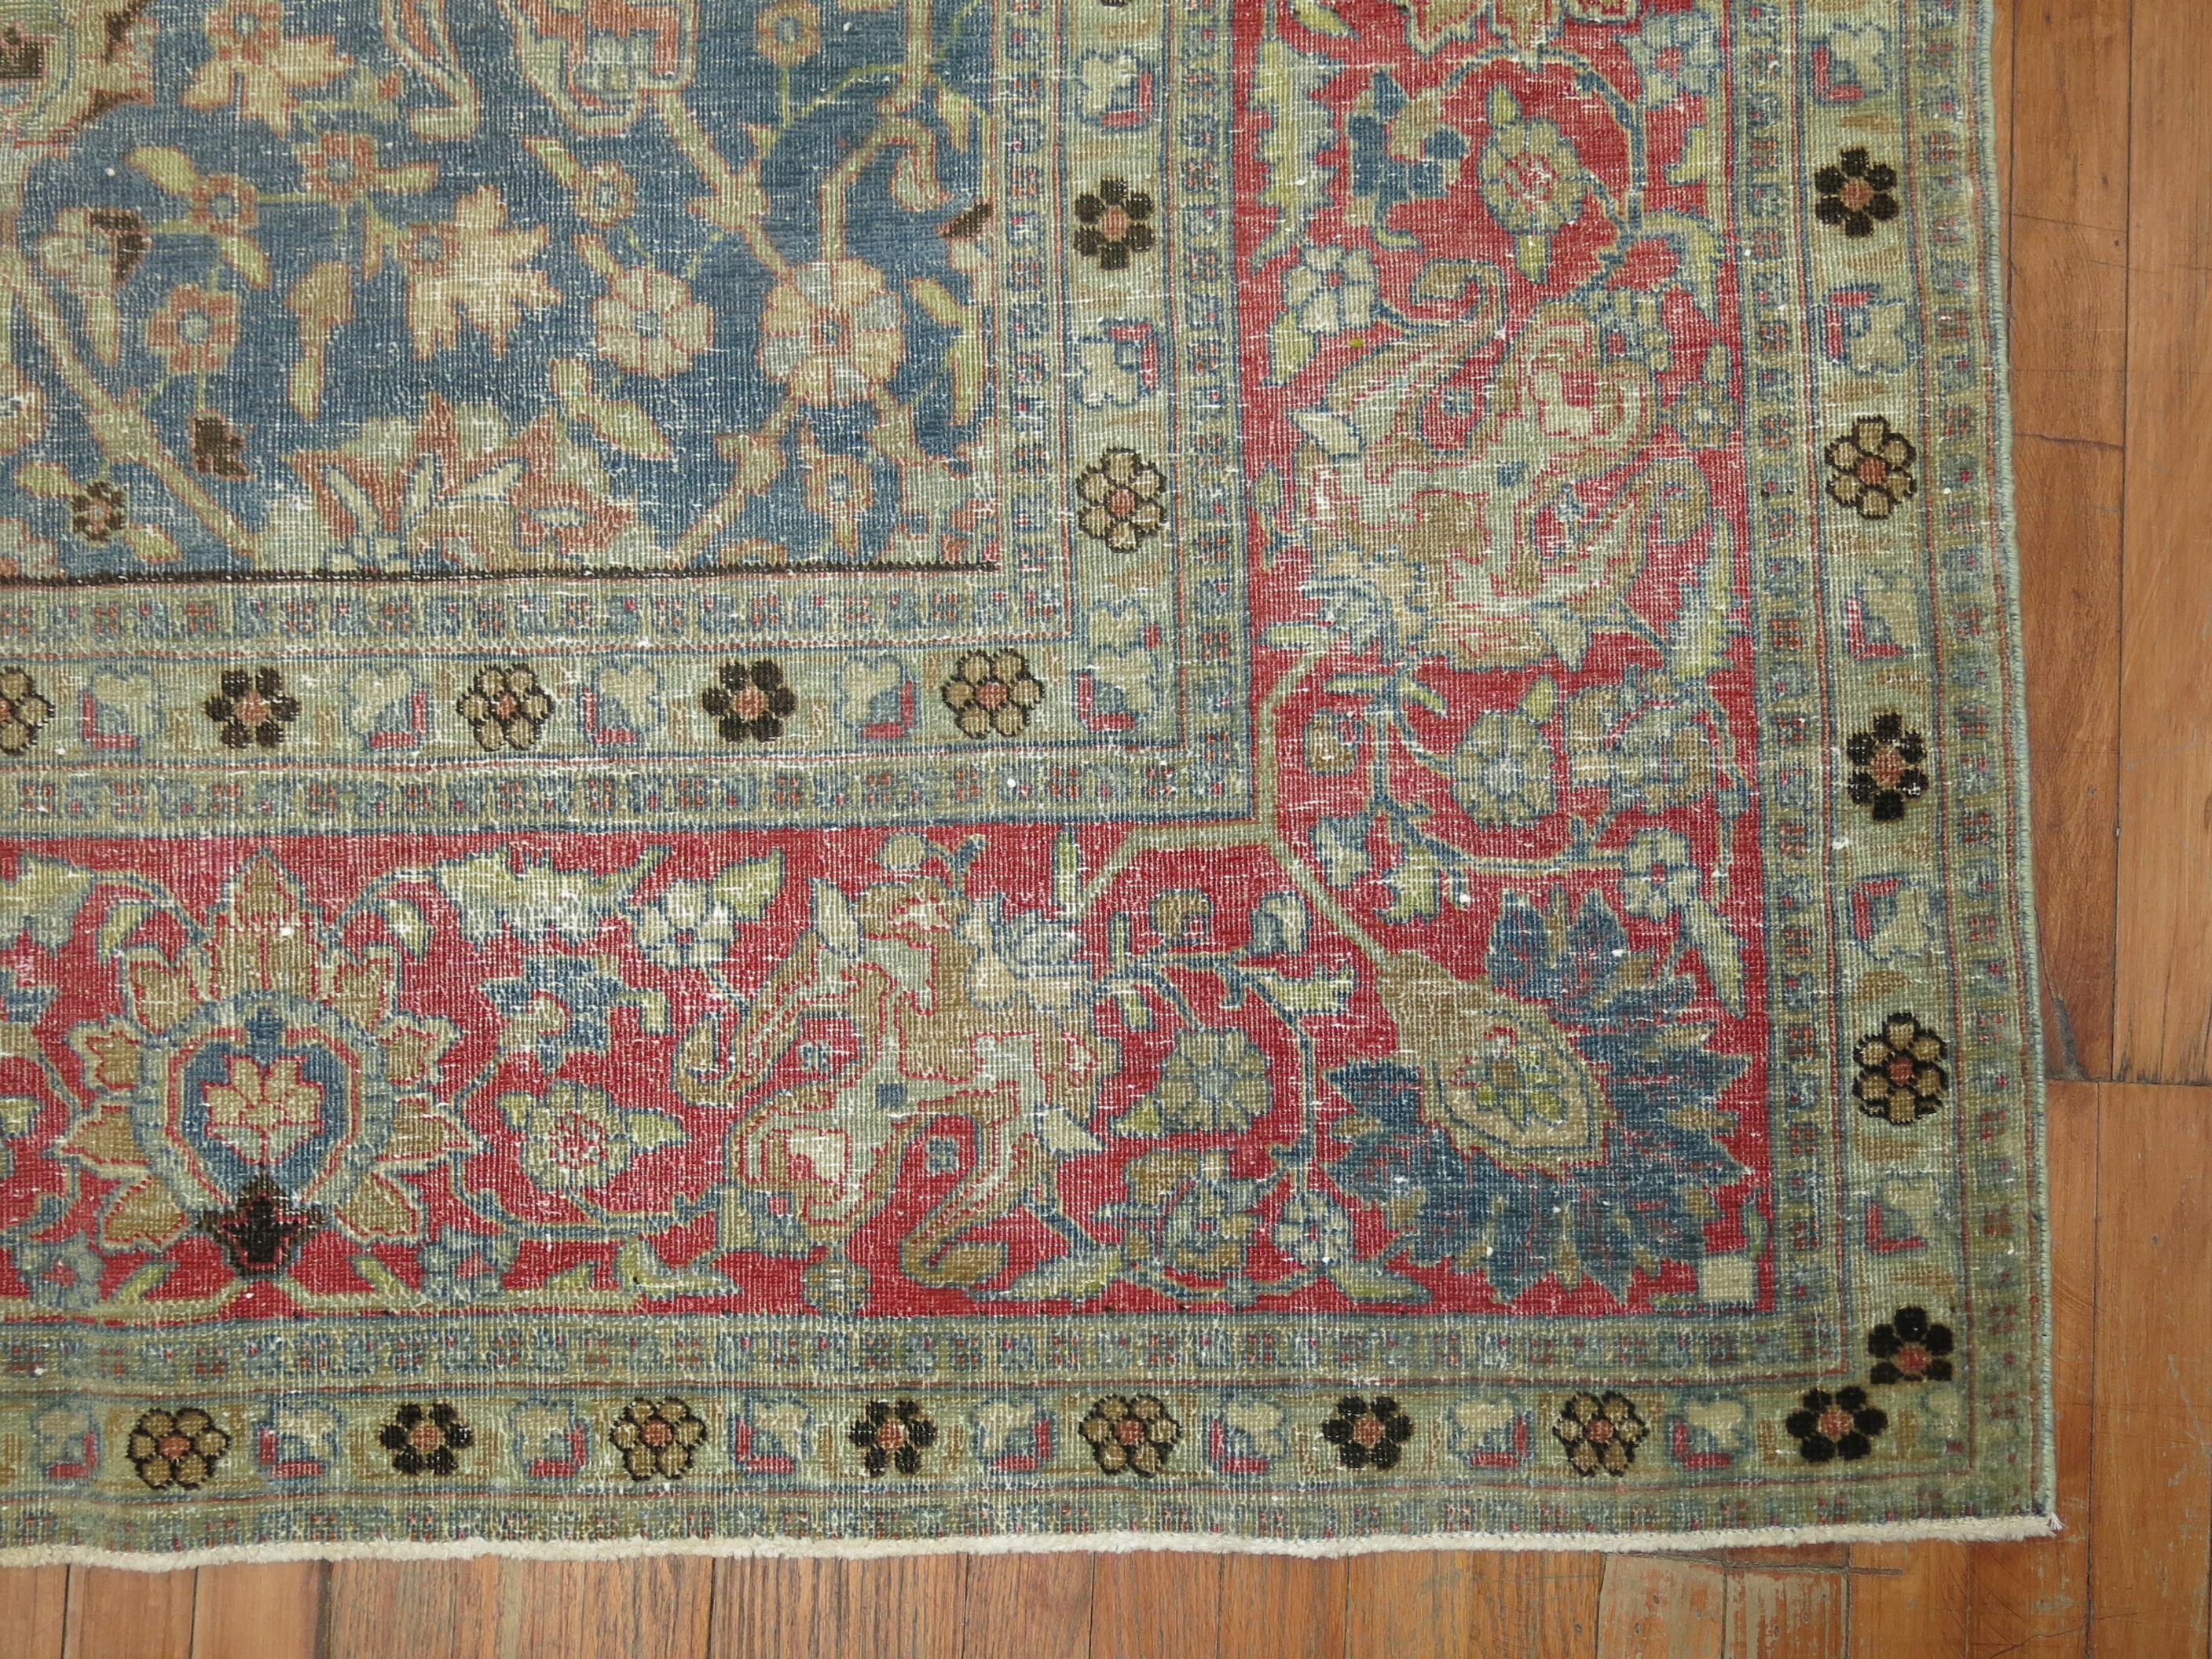 Square Antique Persian Tabriz Rug in Blues and Pink 1